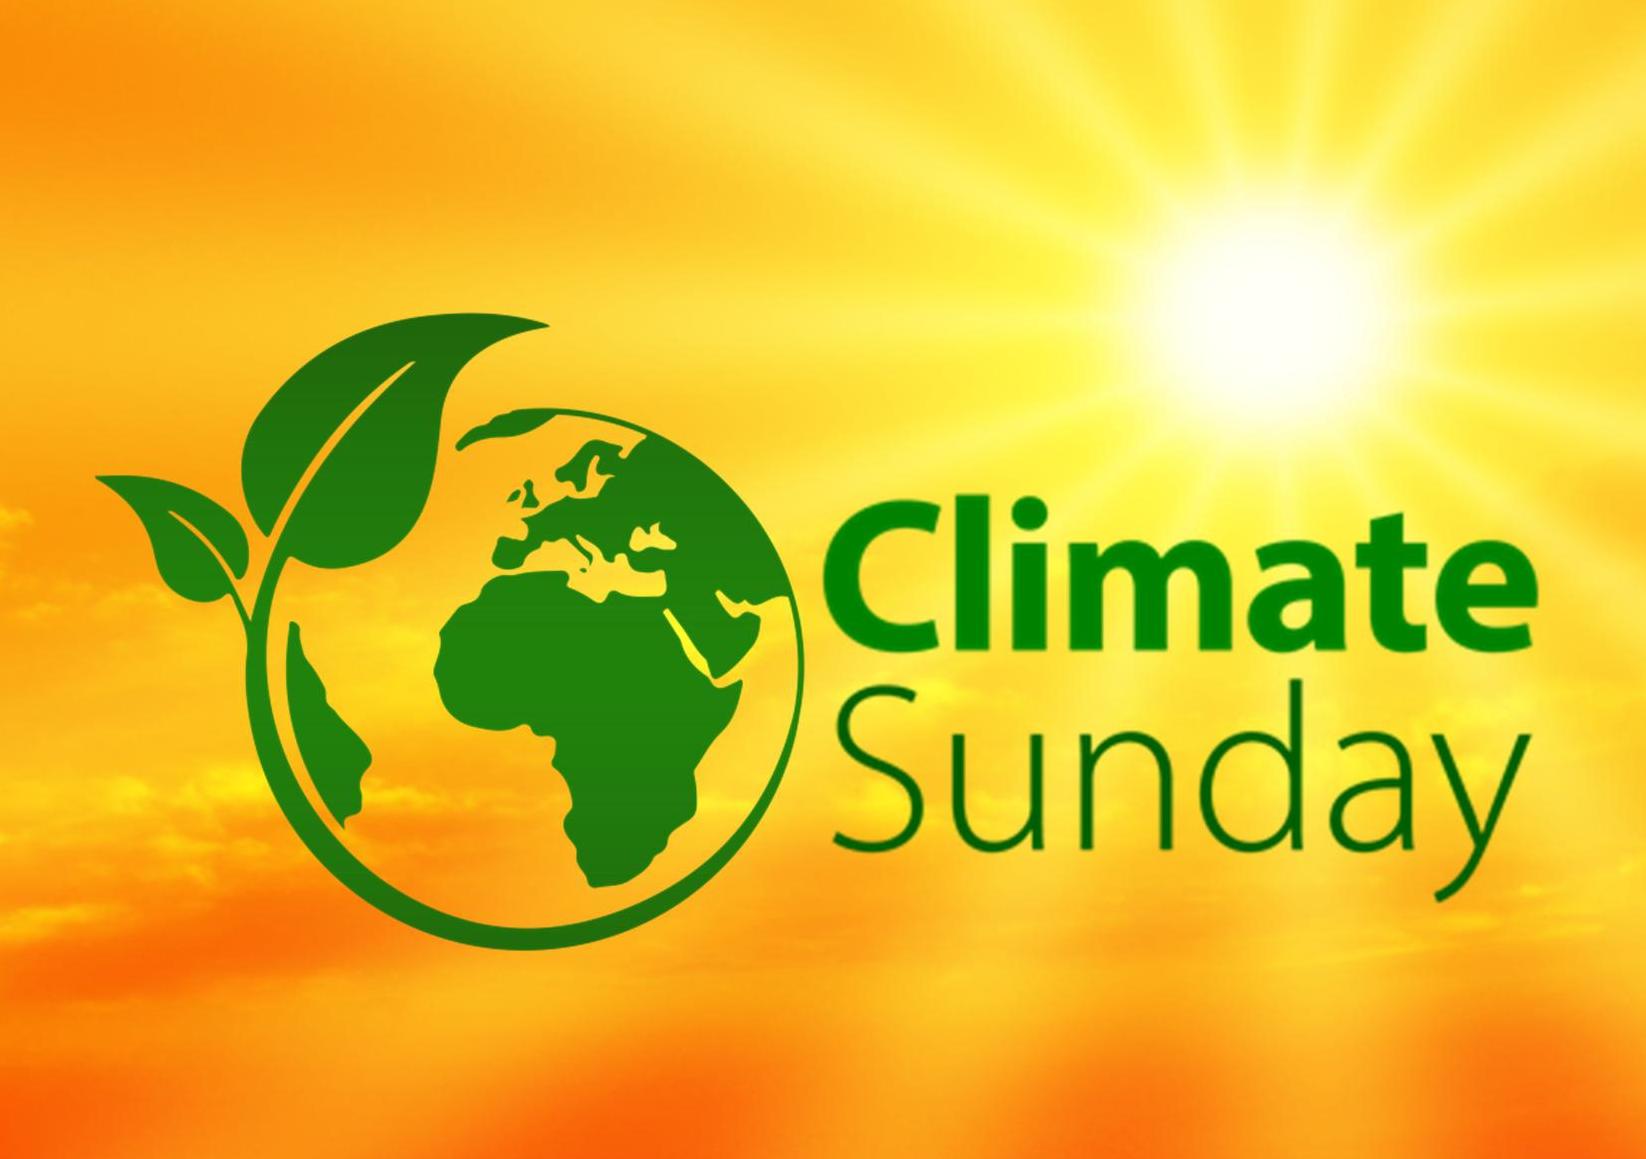 An International Catholic Journal Praises “Climate Sunday” and wants Churches to hold